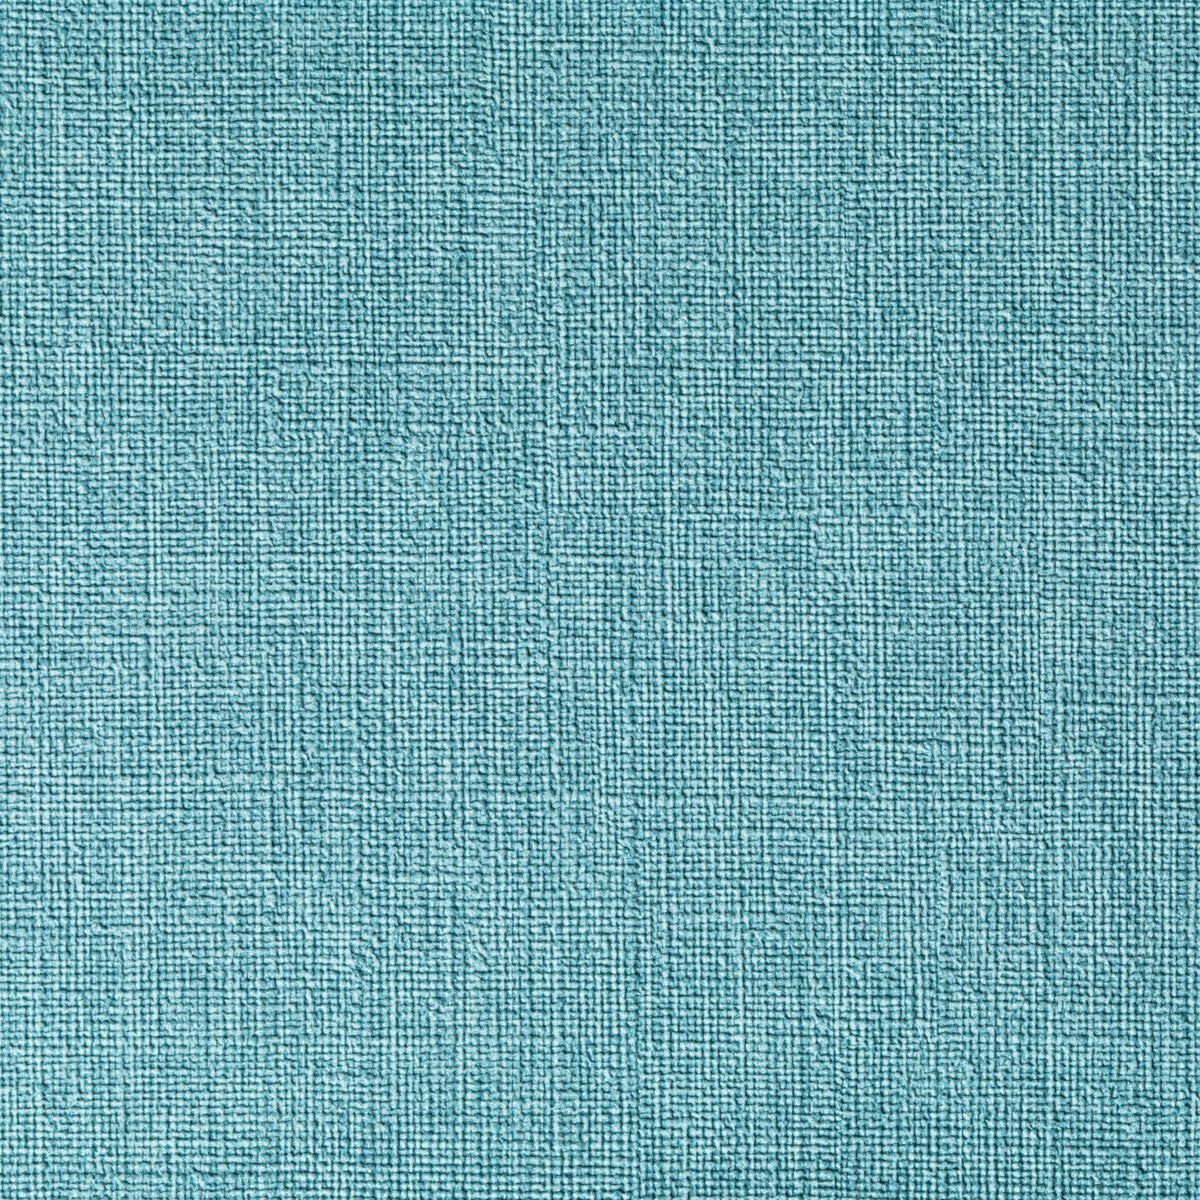 Caslin fabric in lagoon color - pattern CASLIN.3535.0 - by Kravet Contract in the Foundations / Value collection